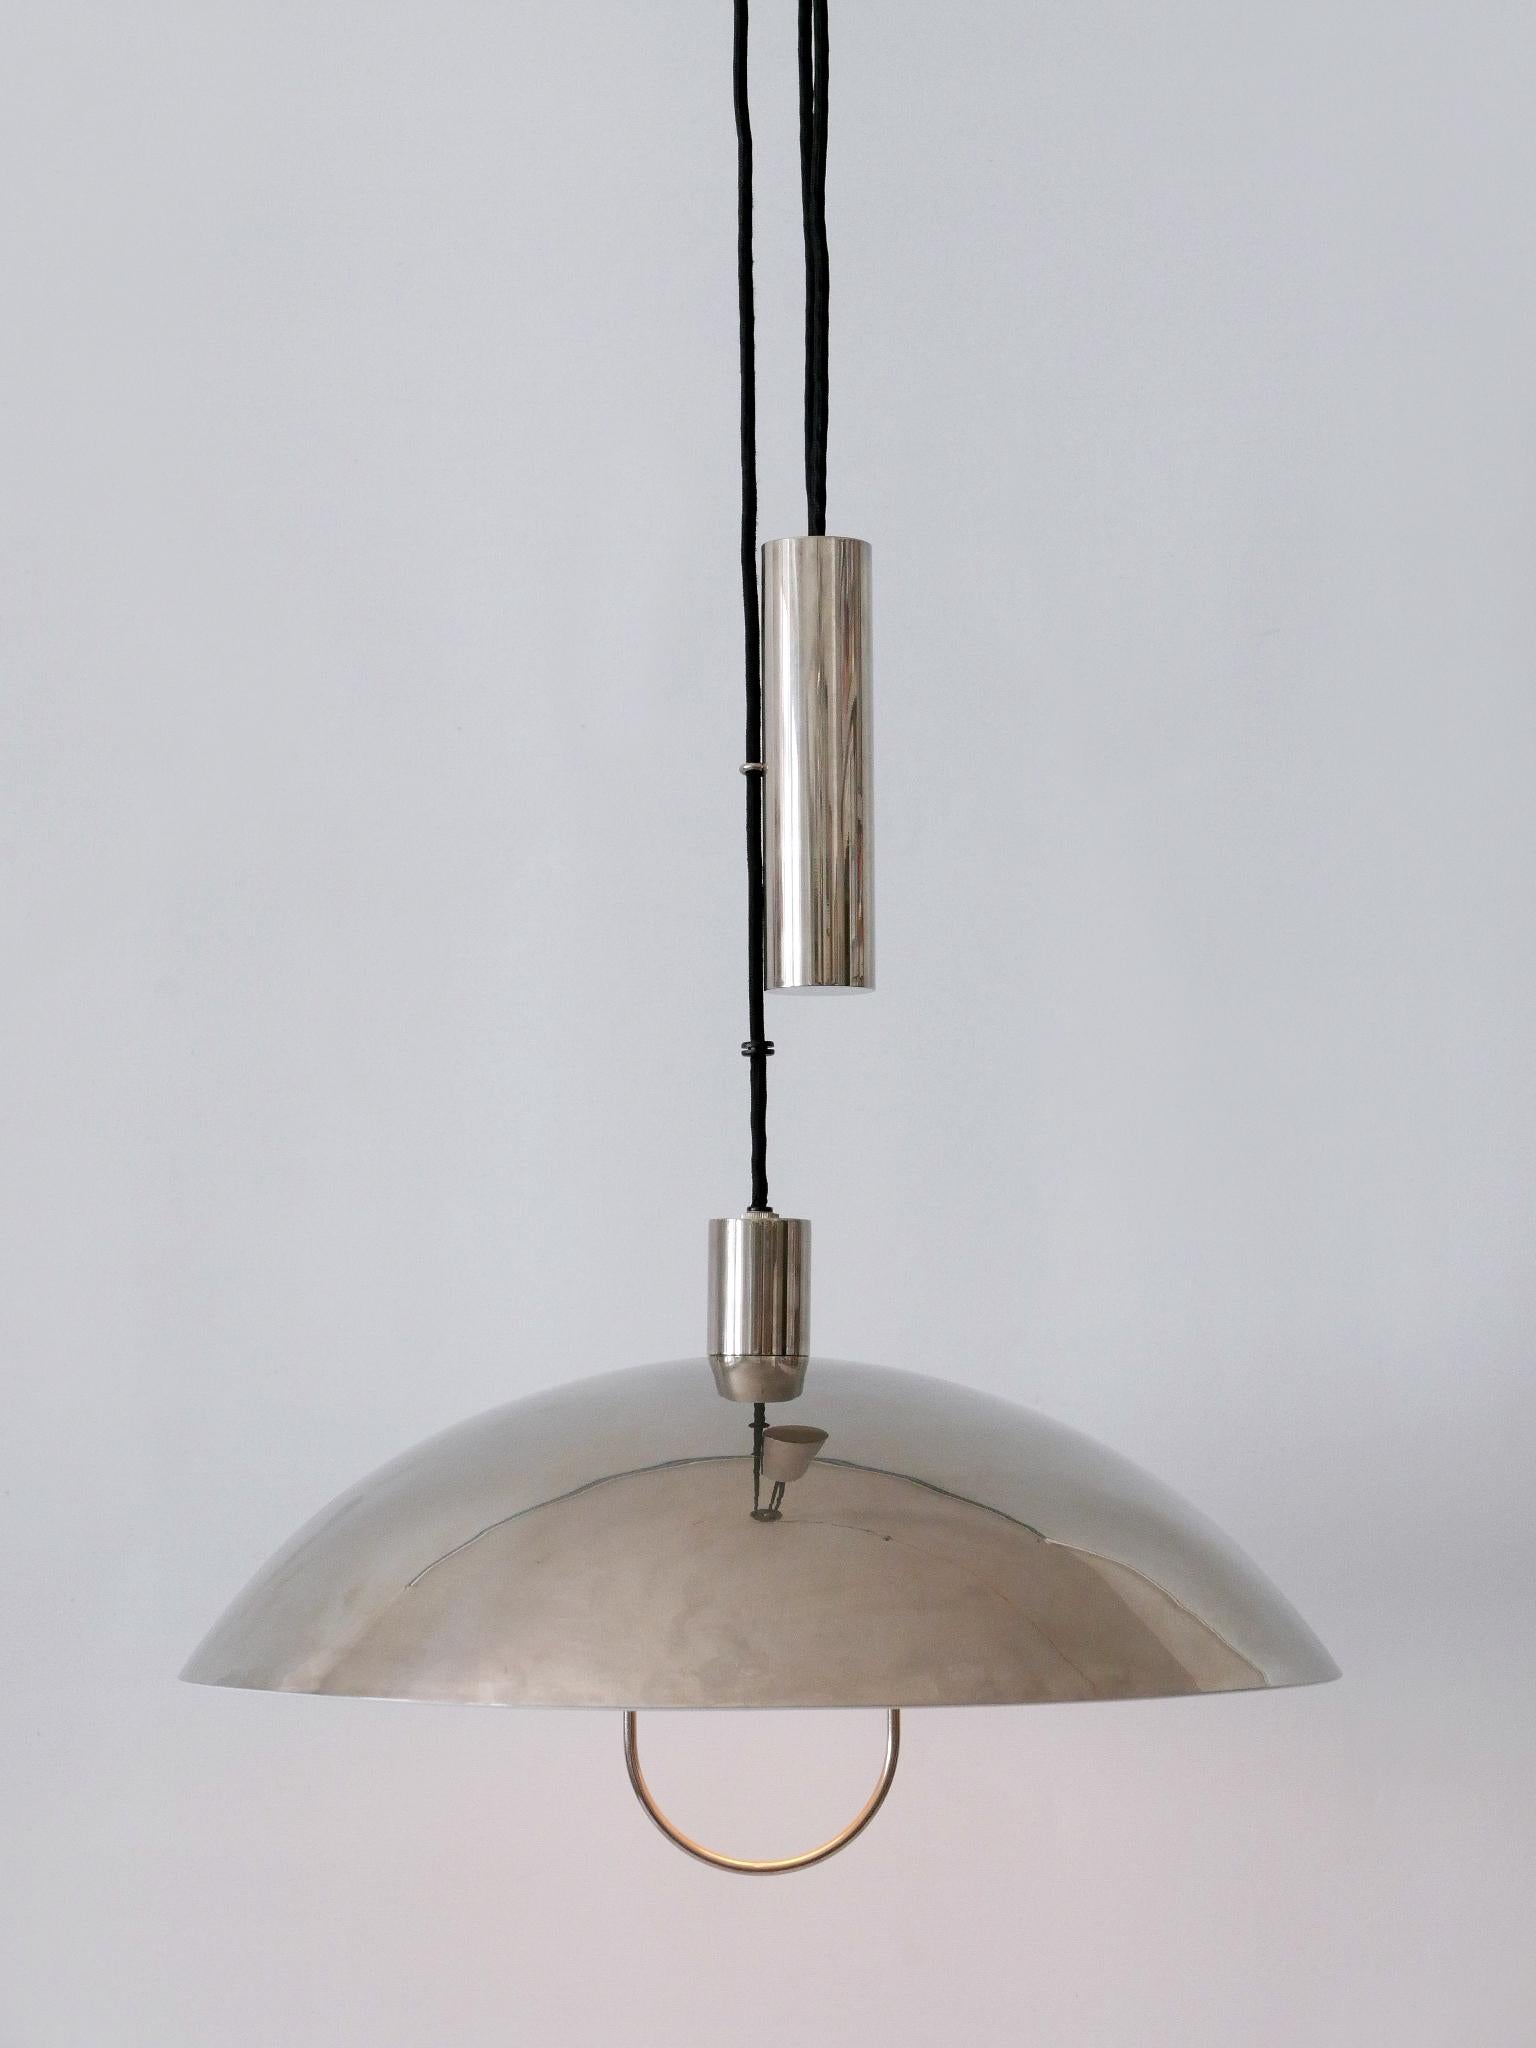 Plated Early Tecnolumen Pendant Lamp 'Bauhaus HMB 25/500' by Marianne Brandt 1980s For Sale